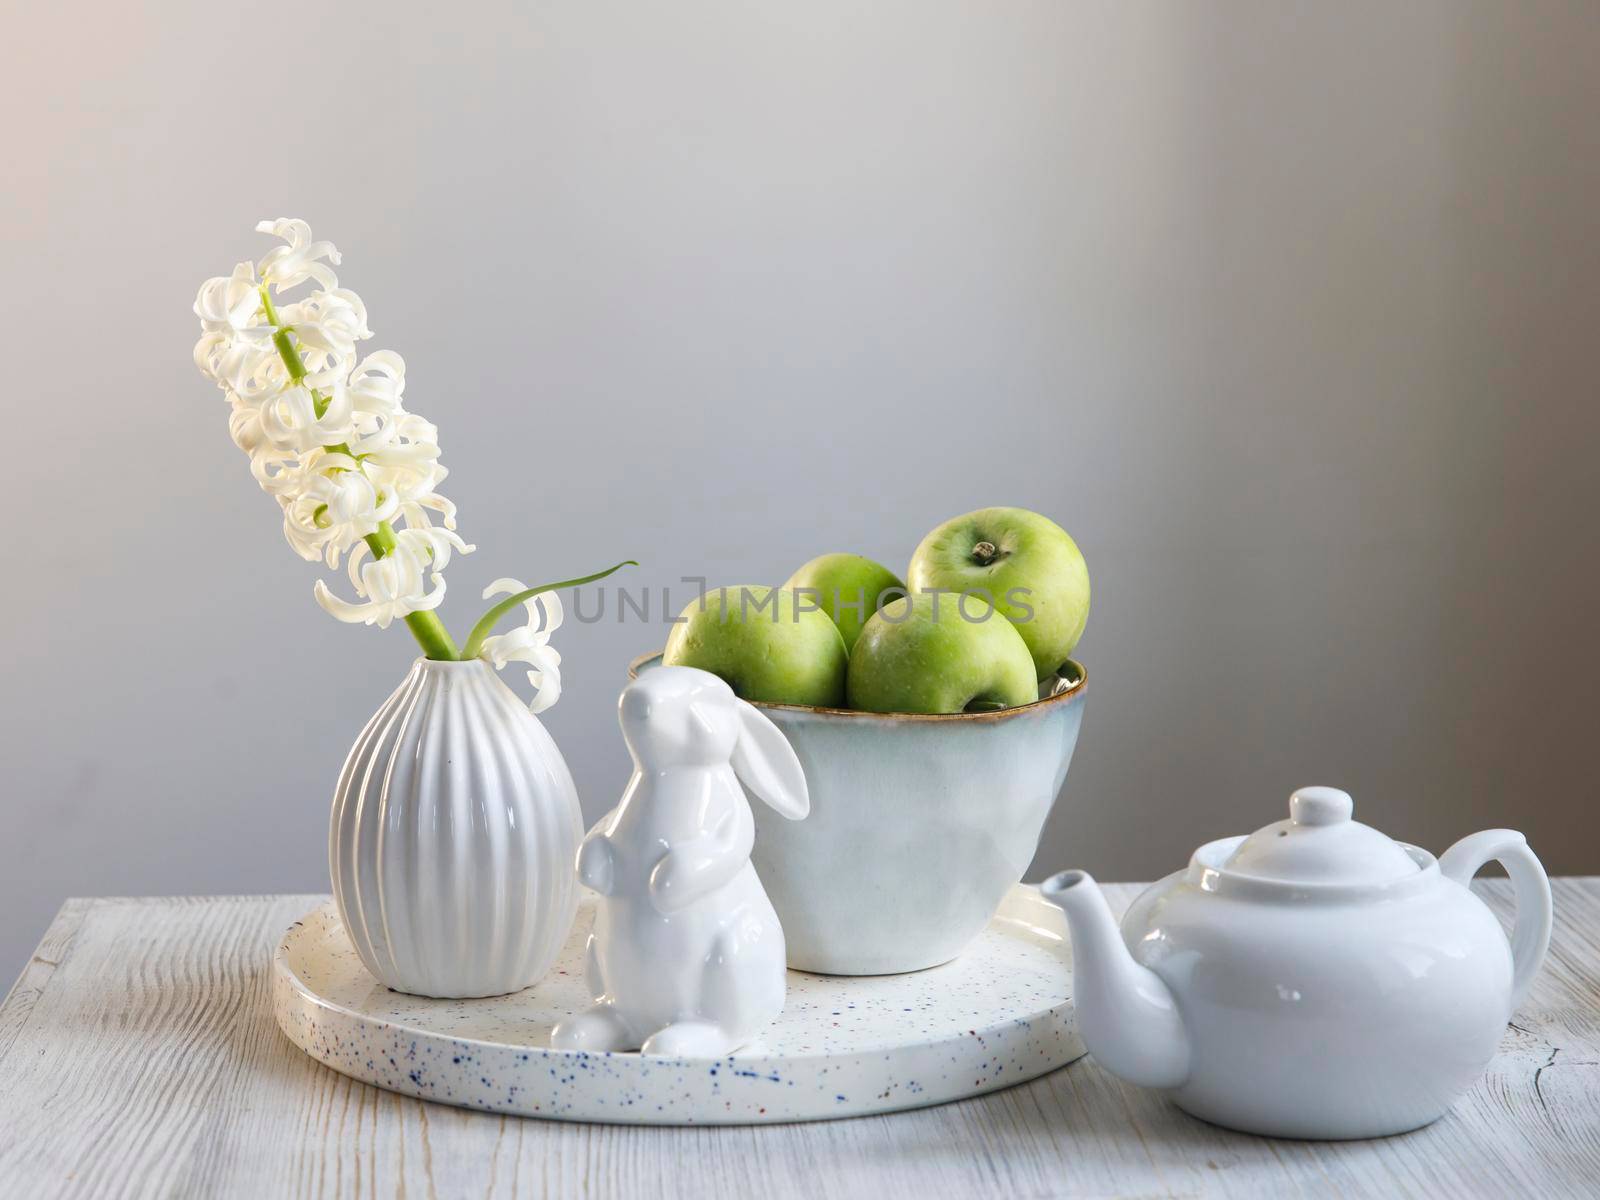 A white hyacinth in a 70s-style fluted vase next to a tray with a large bowl of green apples, an Easter china bunny and a teapot is on the table. Minimalism. Scandinavian style. by elenarostunova